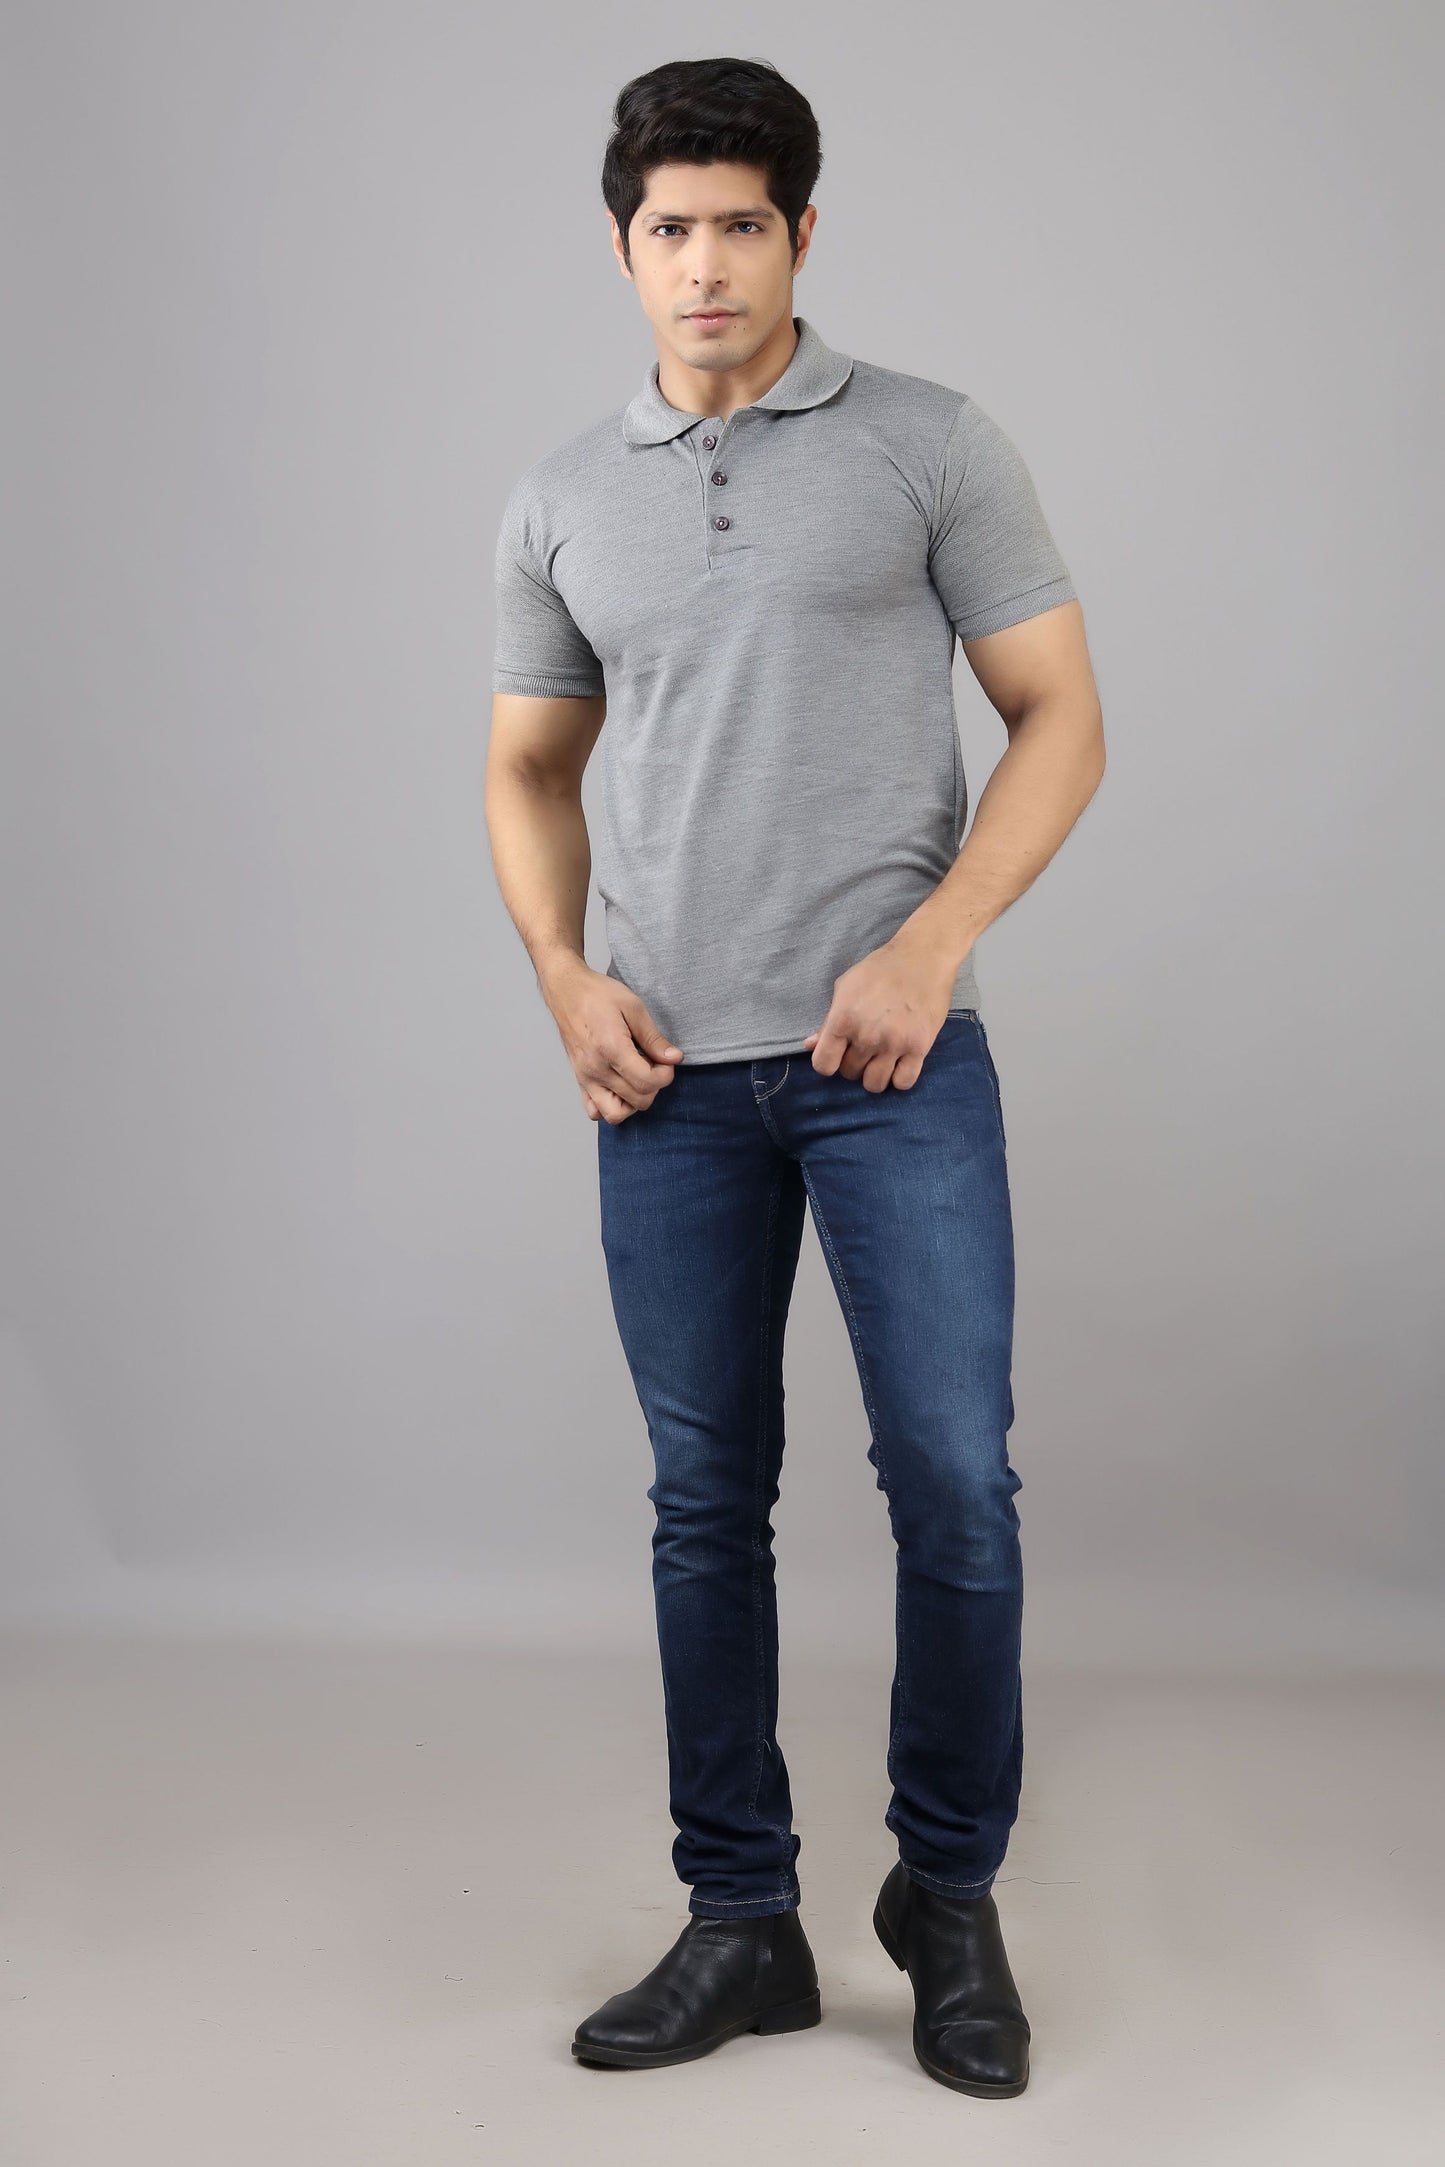 mens t shirt with collar and pocket